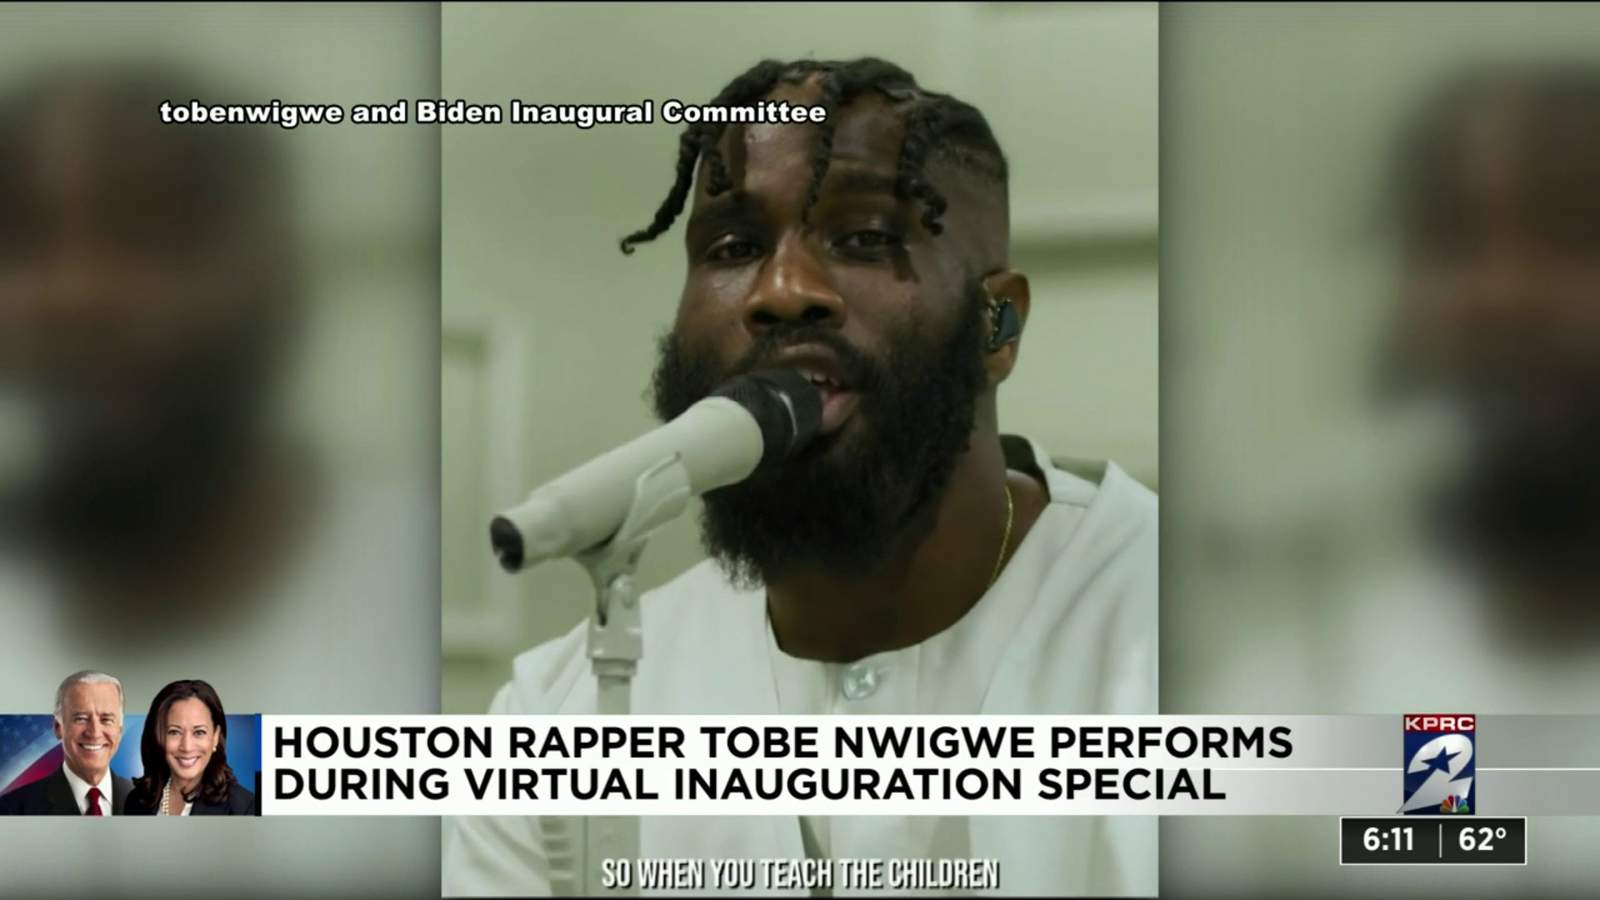 Houston rapper Tobe Nwigue performs during Inauguration special “Celebrating America”